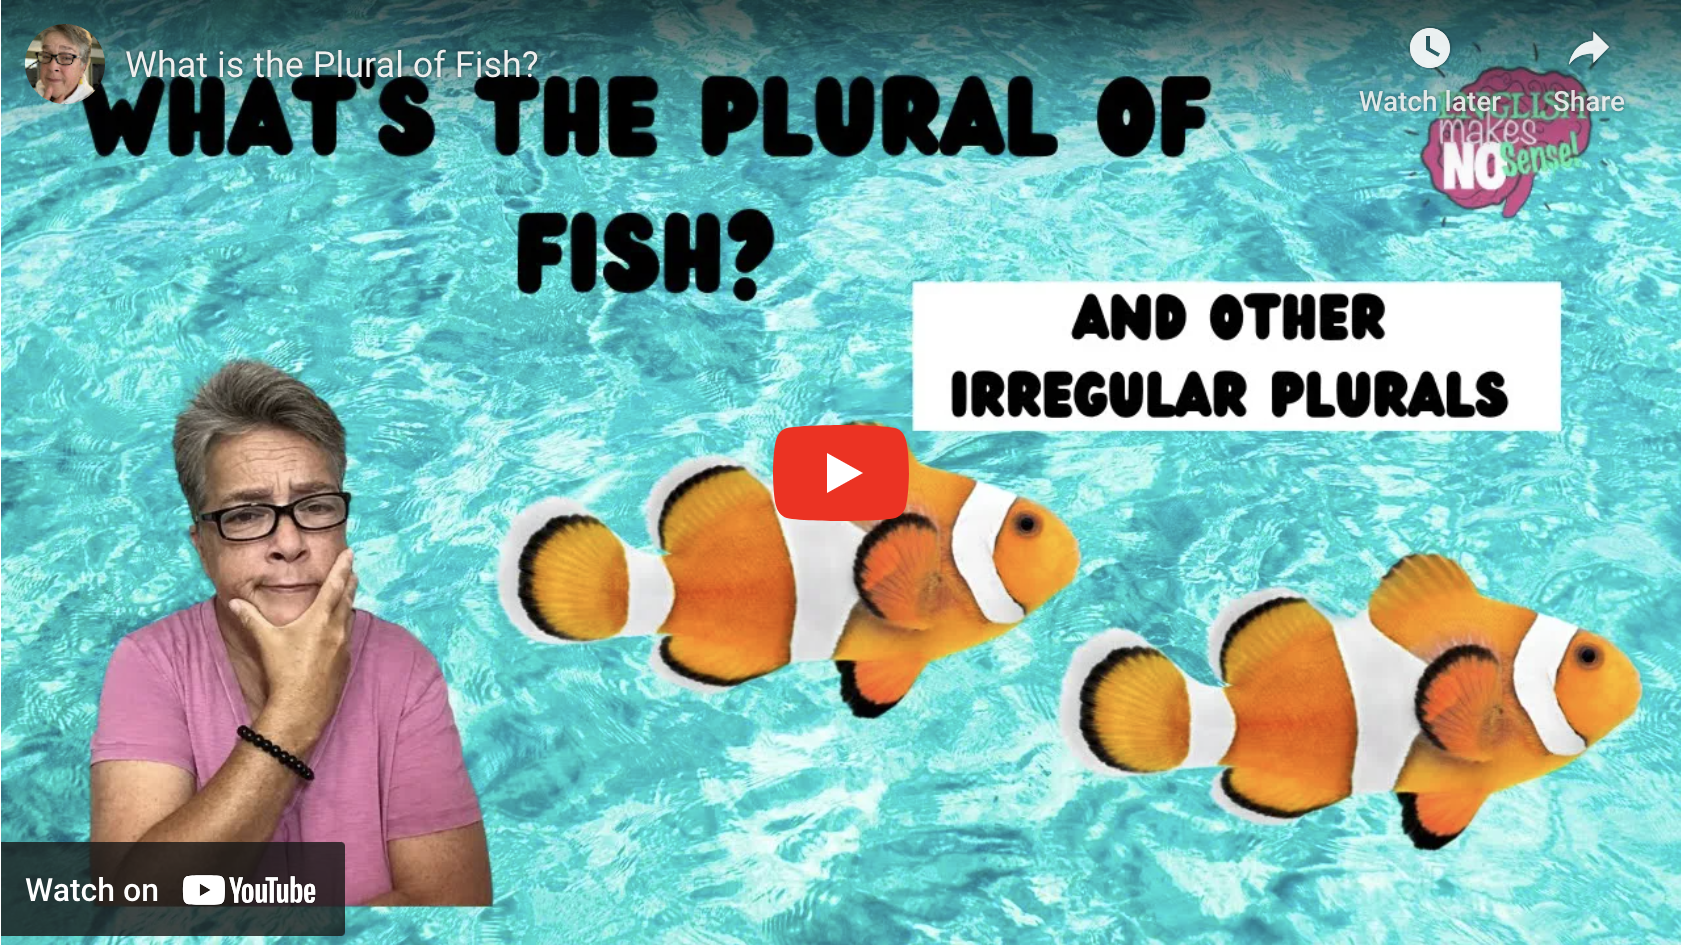 What's the plural of fish and other irregular plurals